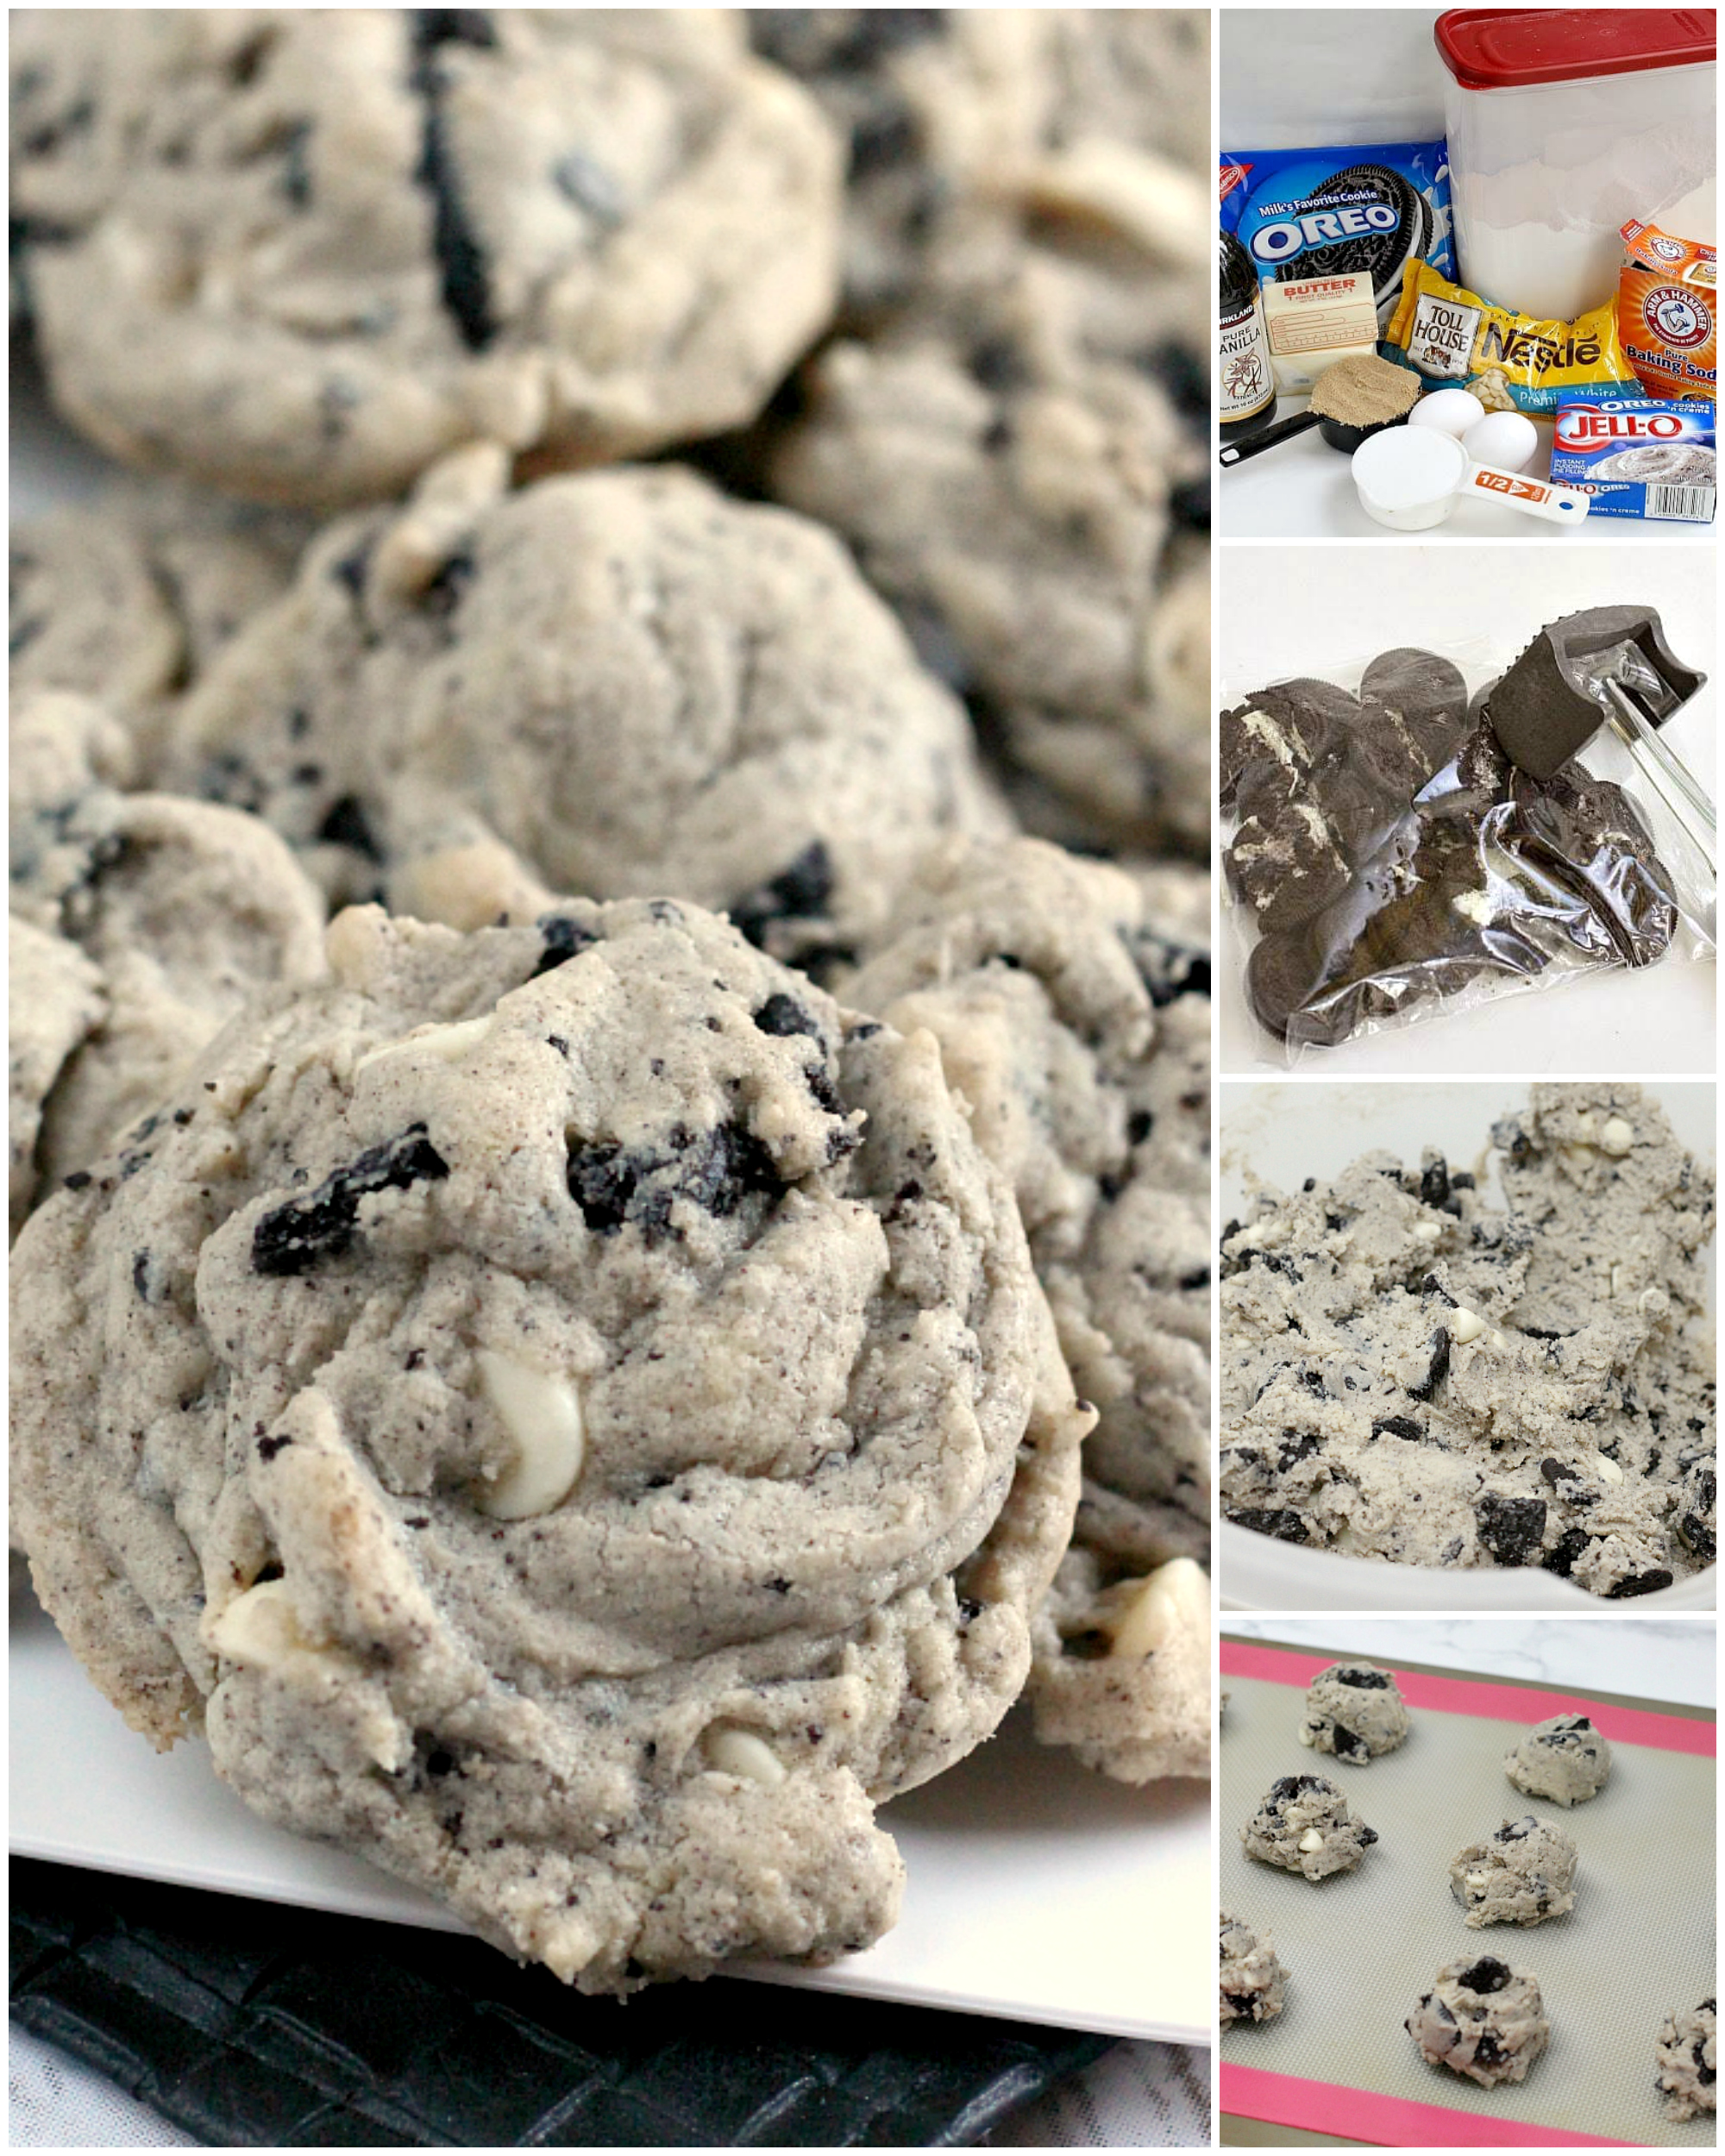 Cookies & Cream Cookies are made with Oreo pudding, white chocolate chips and chunks of Oreo cookies. This delicious cookie recipe yields perfectly soft and chewy cookies every time! 